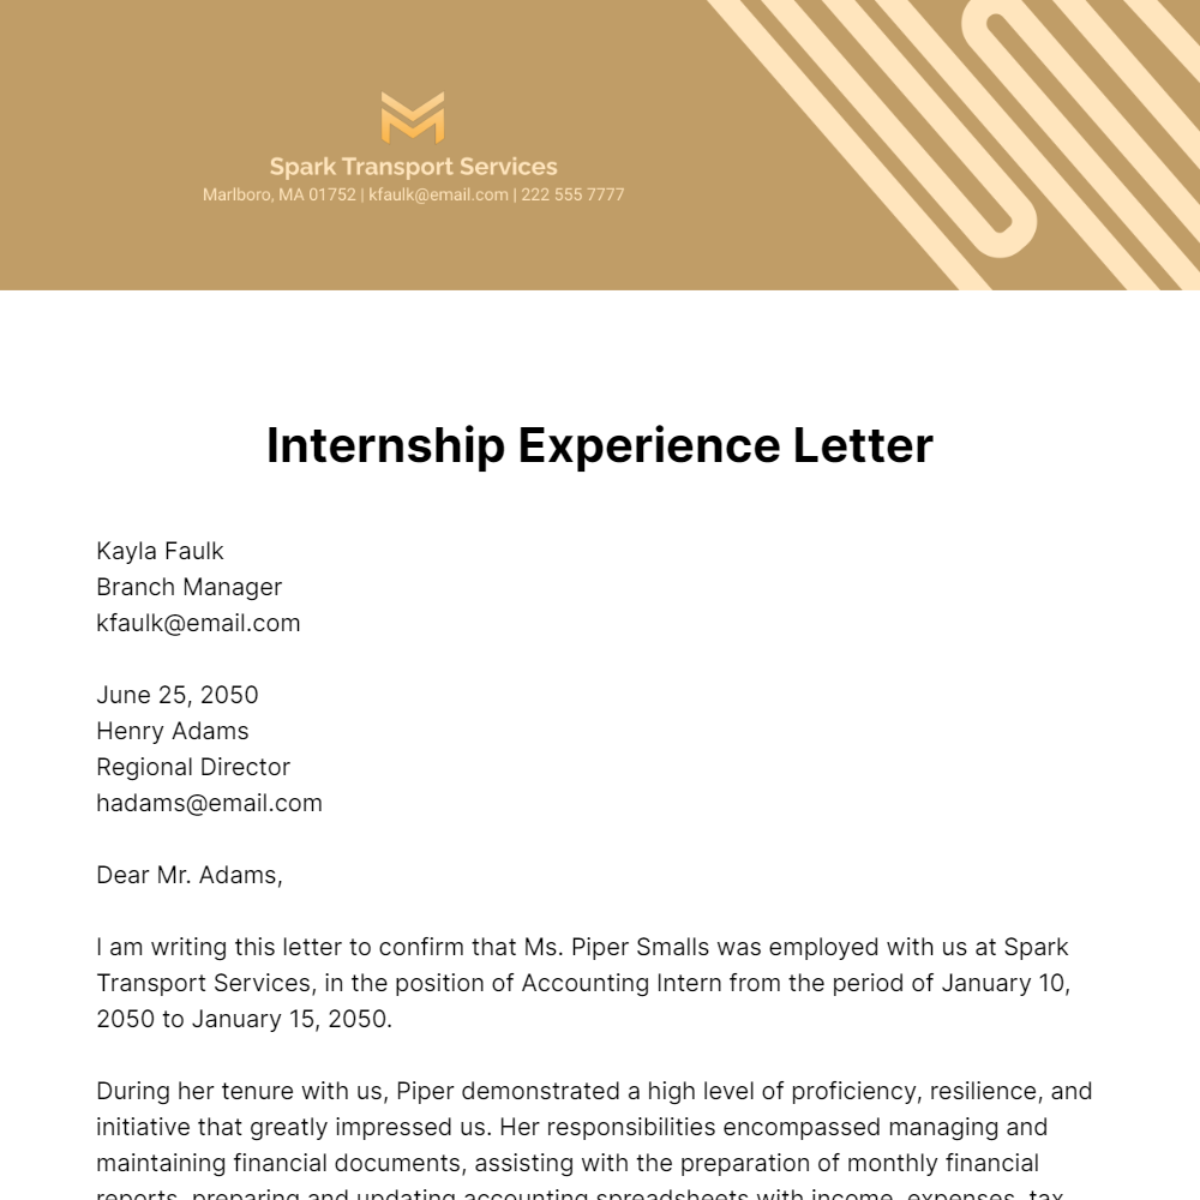 Internship Experience Letter   Template